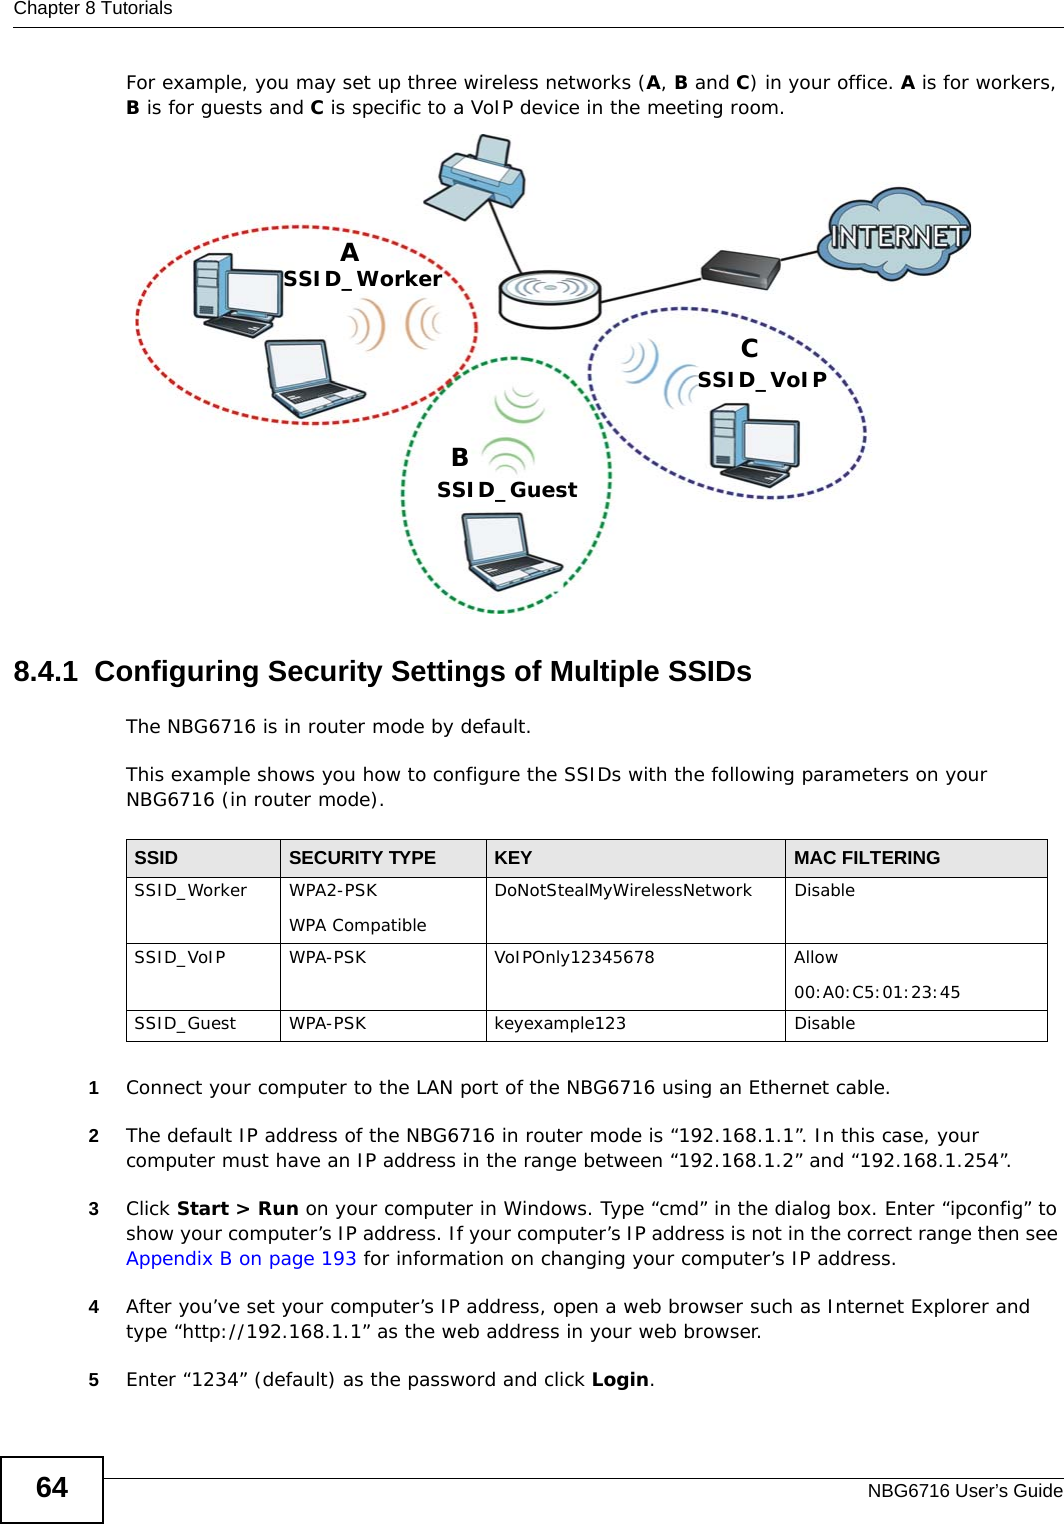 Chapter 8 TutorialsNBG6716 User’s Guide64For example, you may set up three wireless networks (A, B and C) in your office. A is for workers, B is for guests and C is specific to a VoIP device in the meeting room. 8.4.1  Configuring Security Settings of Multiple SSIDsThe NBG6716 is in router mode by default.This example shows you how to configure the SSIDs with the following parameters on your NBG6716 (in router mode).1Connect your computer to the LAN port of the NBG6716 using an Ethernet cable. 2The default IP address of the NBG6716 in router mode is “192.168.1.1”. In this case, your computer must have an IP address in the range between “192.168.1.2” and “192.168.1.254”.3Click Start &gt; Run on your computer in Windows. Type “cmd” in the dialog box. Enter “ipconfig” to show your computer’s IP address. If your computer’s IP address is not in the correct range then see Appendix B on page 193 for information on changing your computer’s IP address.4After you’ve set your computer’s IP address, open a web browser such as Internet Explorer and type “http://192.168.1.1” as the web address in your web browser.5Enter “1234” (default) as the password and click Login.ABCSSID_GuestSSID_WorkerSSID_VoIPSSID SECURITY TYPE KEY MAC FILTERINGSSID_Worker WPA2-PSKWPA Compatible DoNotStealMyWirelessNetwork DisableSSID_VoIP WPA-PSK VoIPOnly12345678 Allow00:A0:C5:01:23:45SSID_Guest WPA-PSK keyexample123 Disable